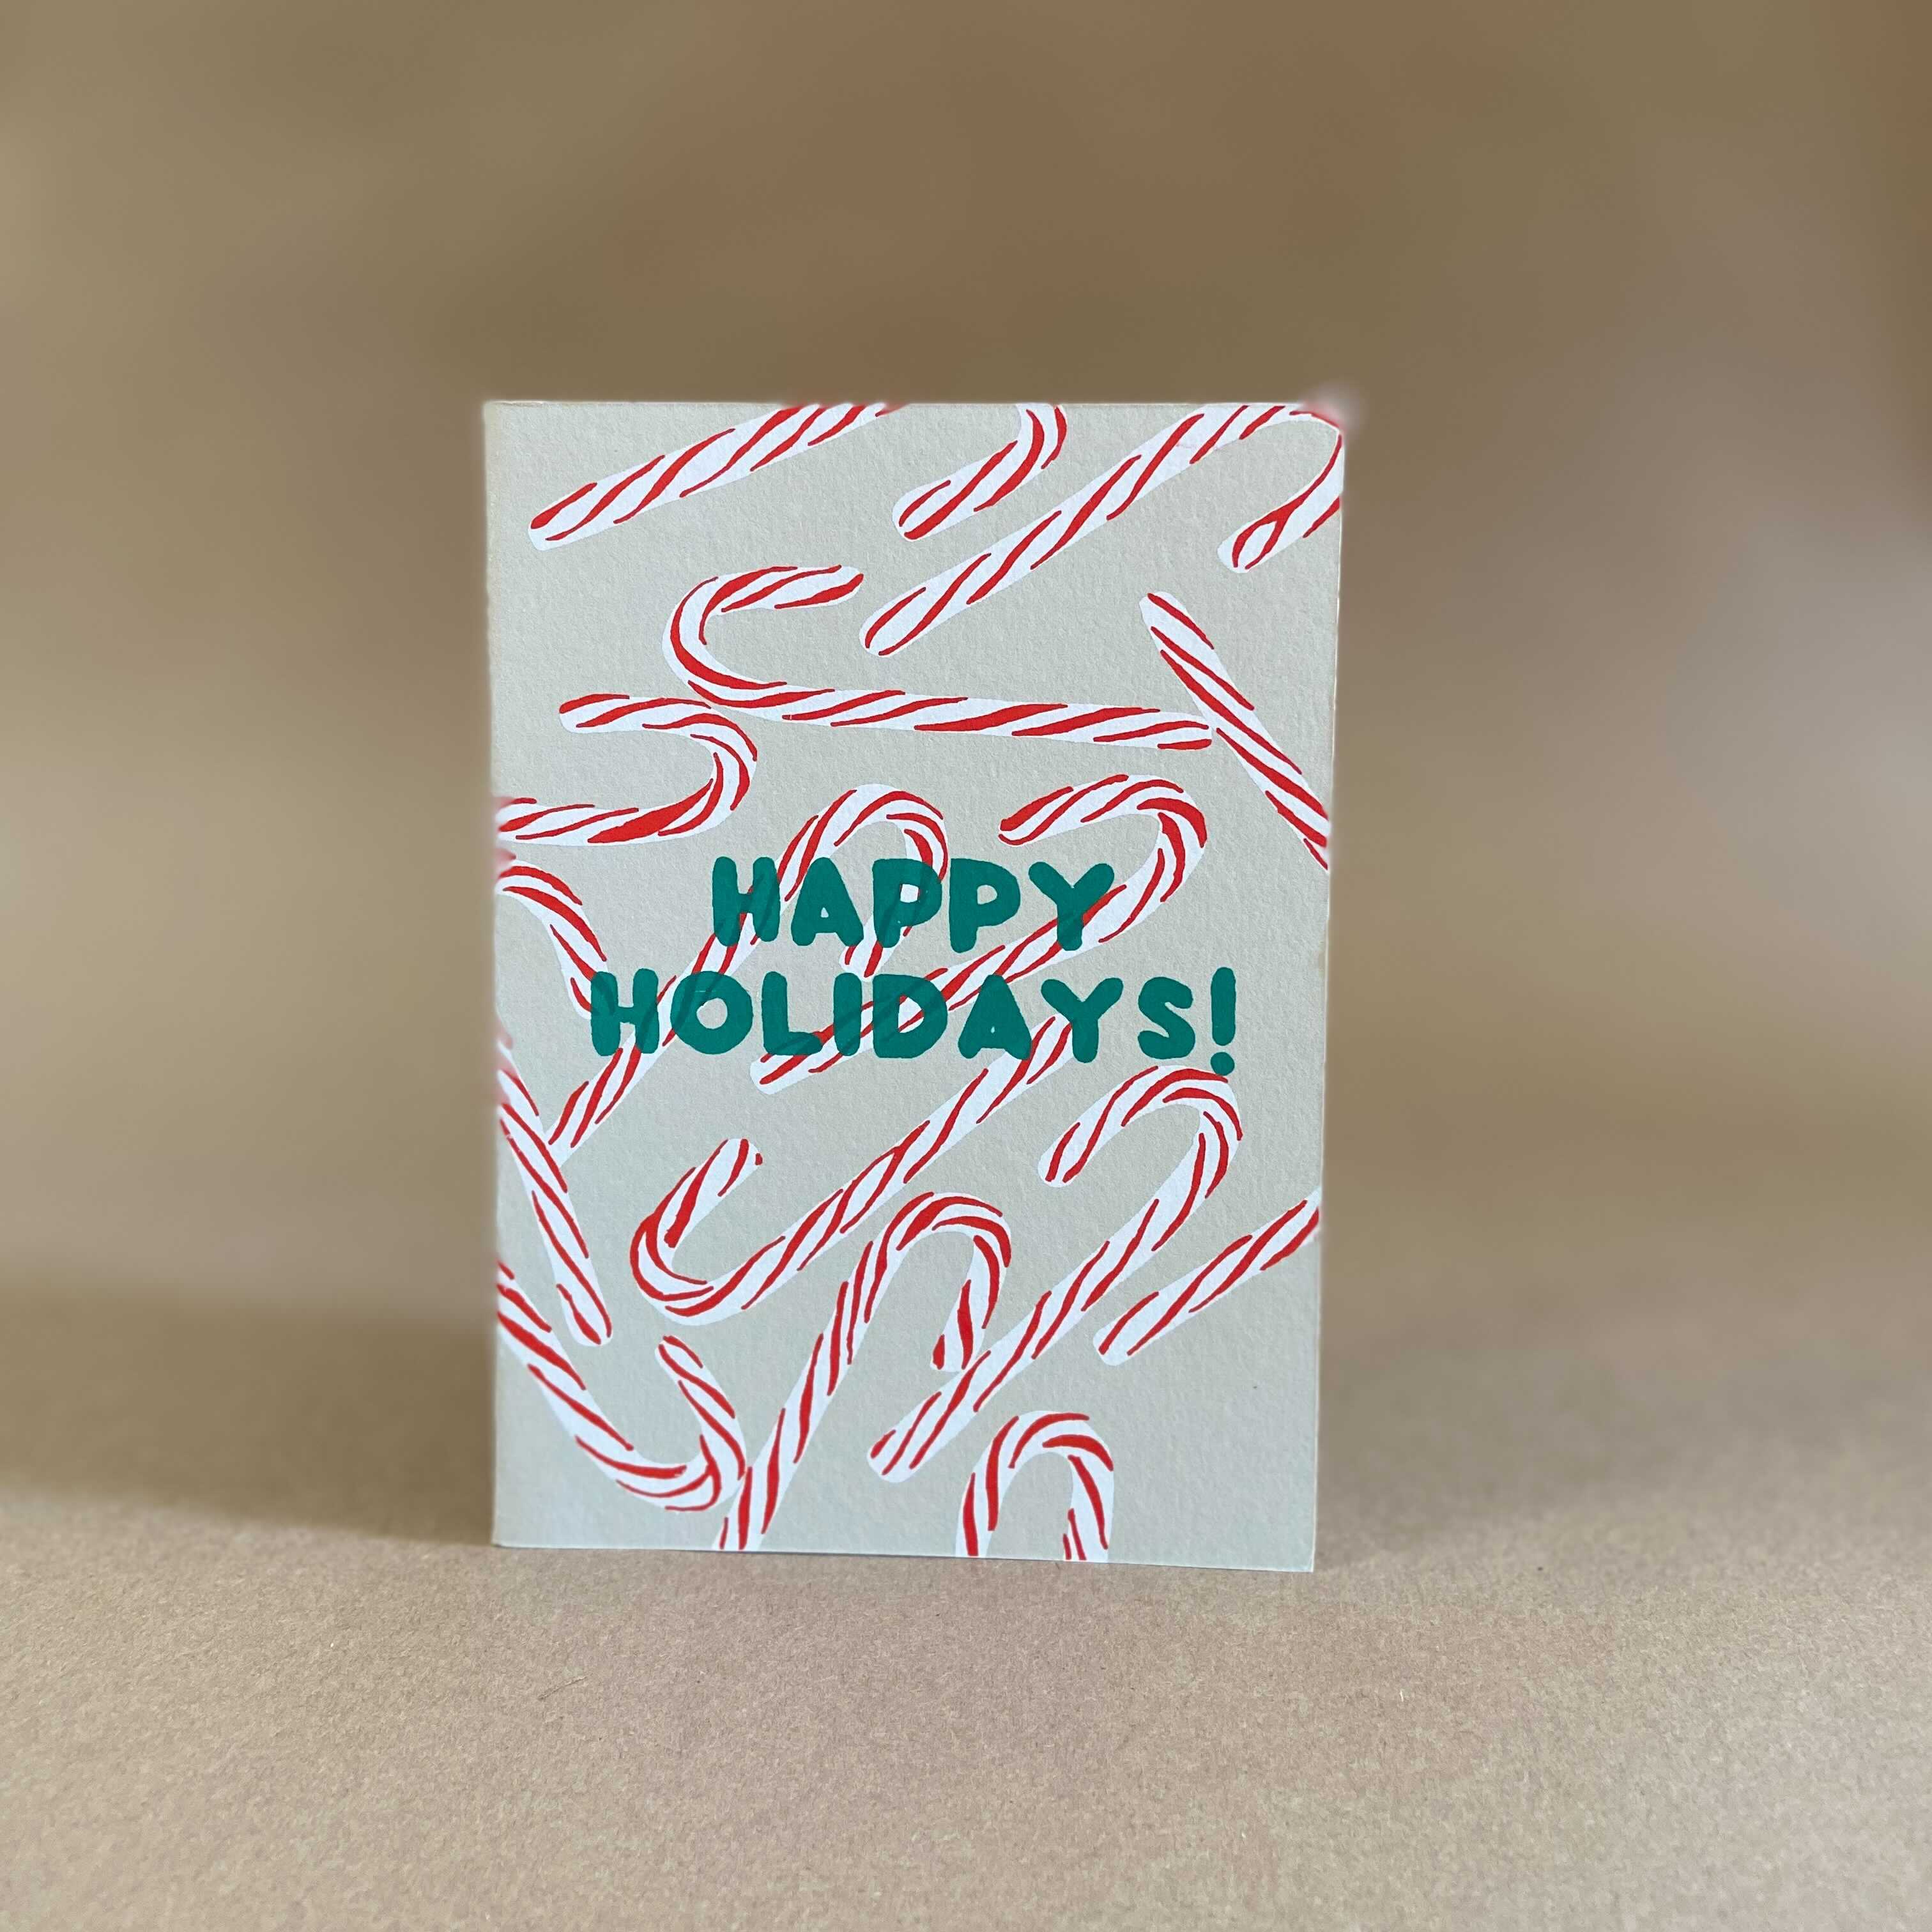 GOLD TEETH BROOKLYN Stationery Happy Holidays Card with Candy Canes